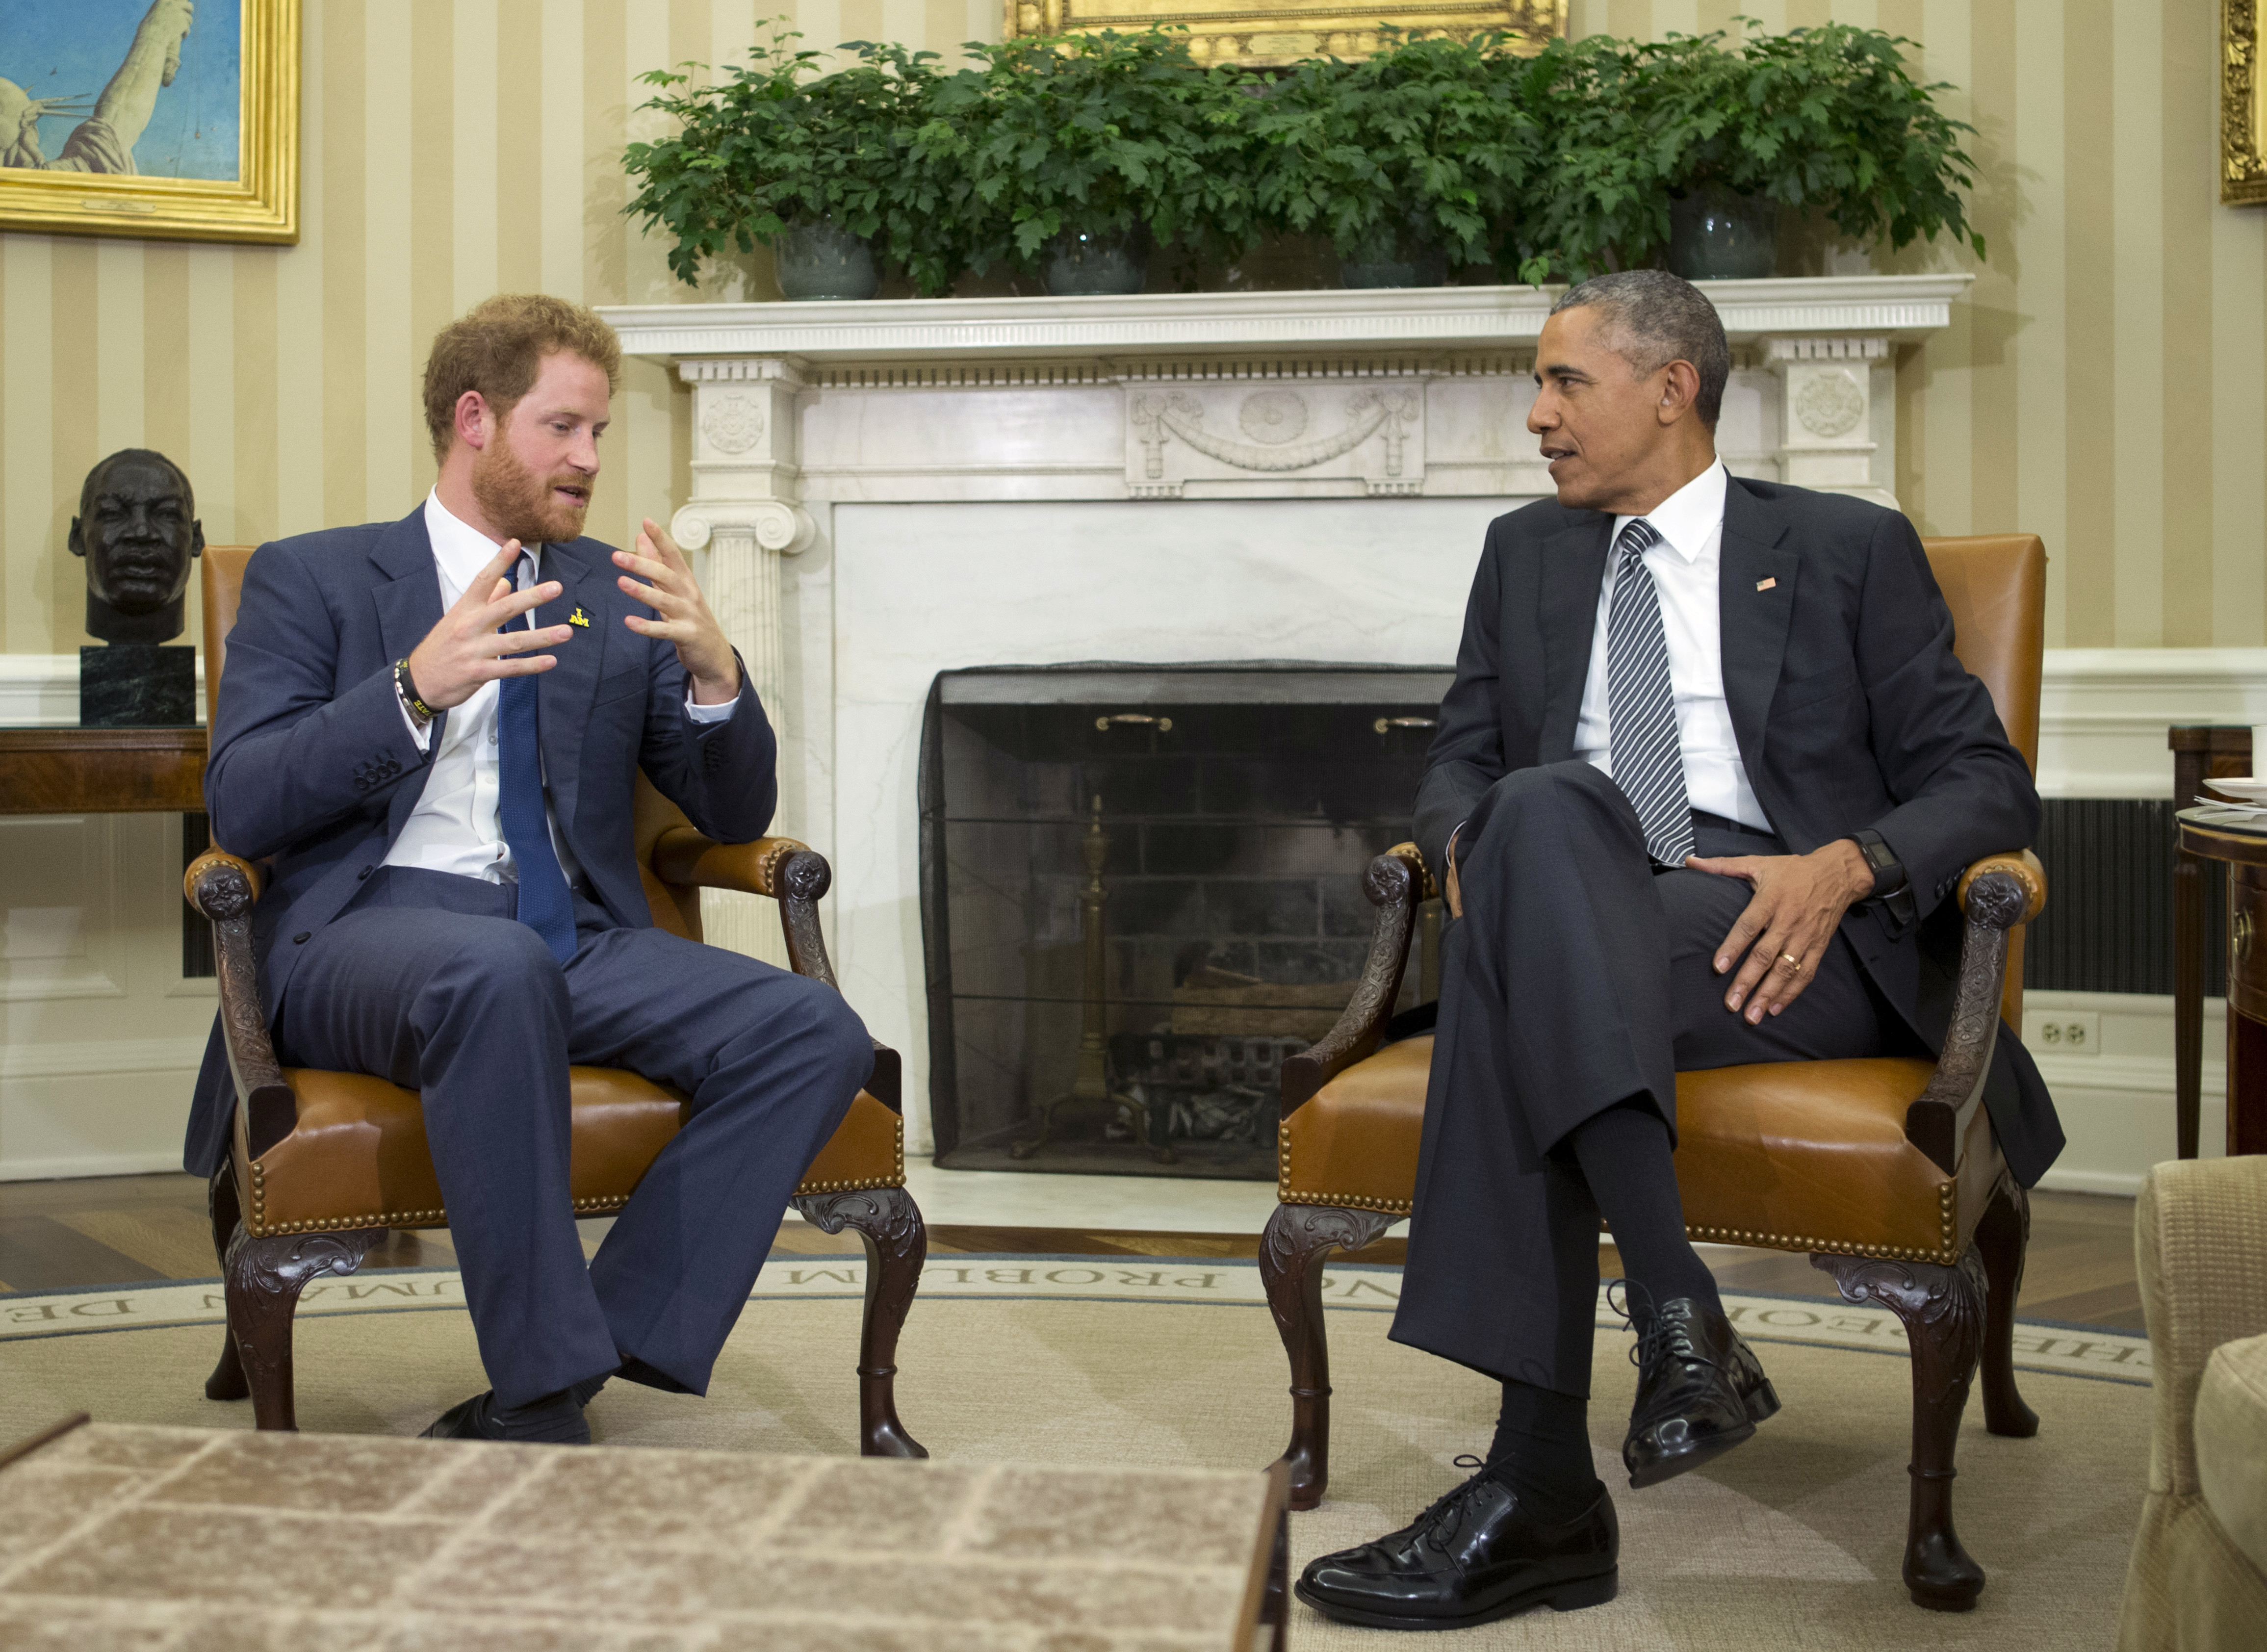 It was a historic moment: a British prince meeting a United States president for the first time at the Oval office. But contrary to the red carpet treatment and royal trappings that he is used to, Prince Harry met with President Barack Obama in a low-key set up, The Daily Mail reports.